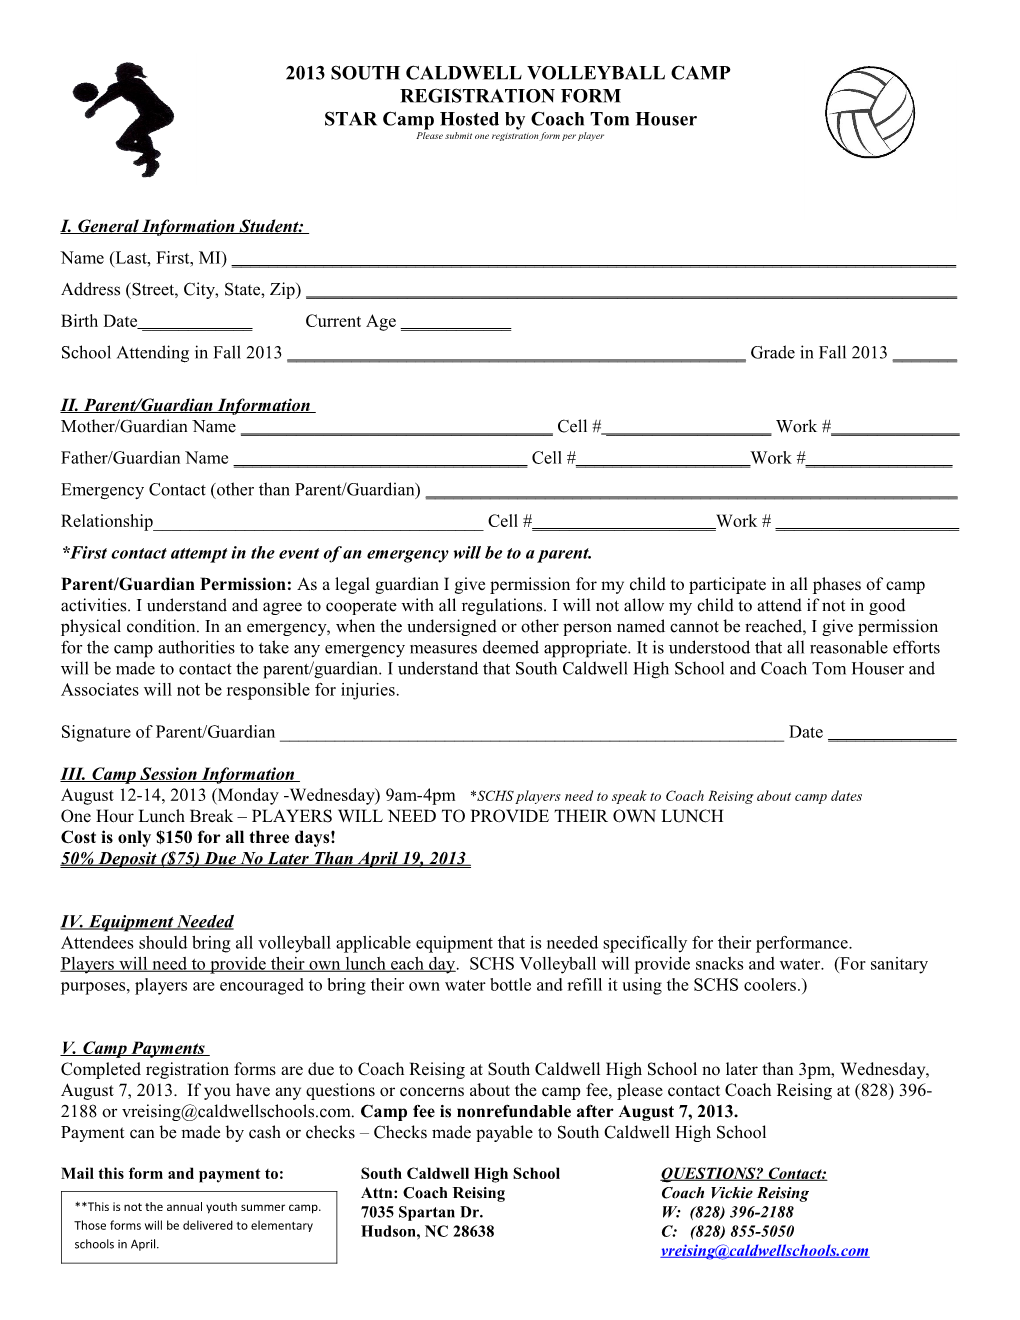 2012 South Caldwell Volleyball Camp Registration Form